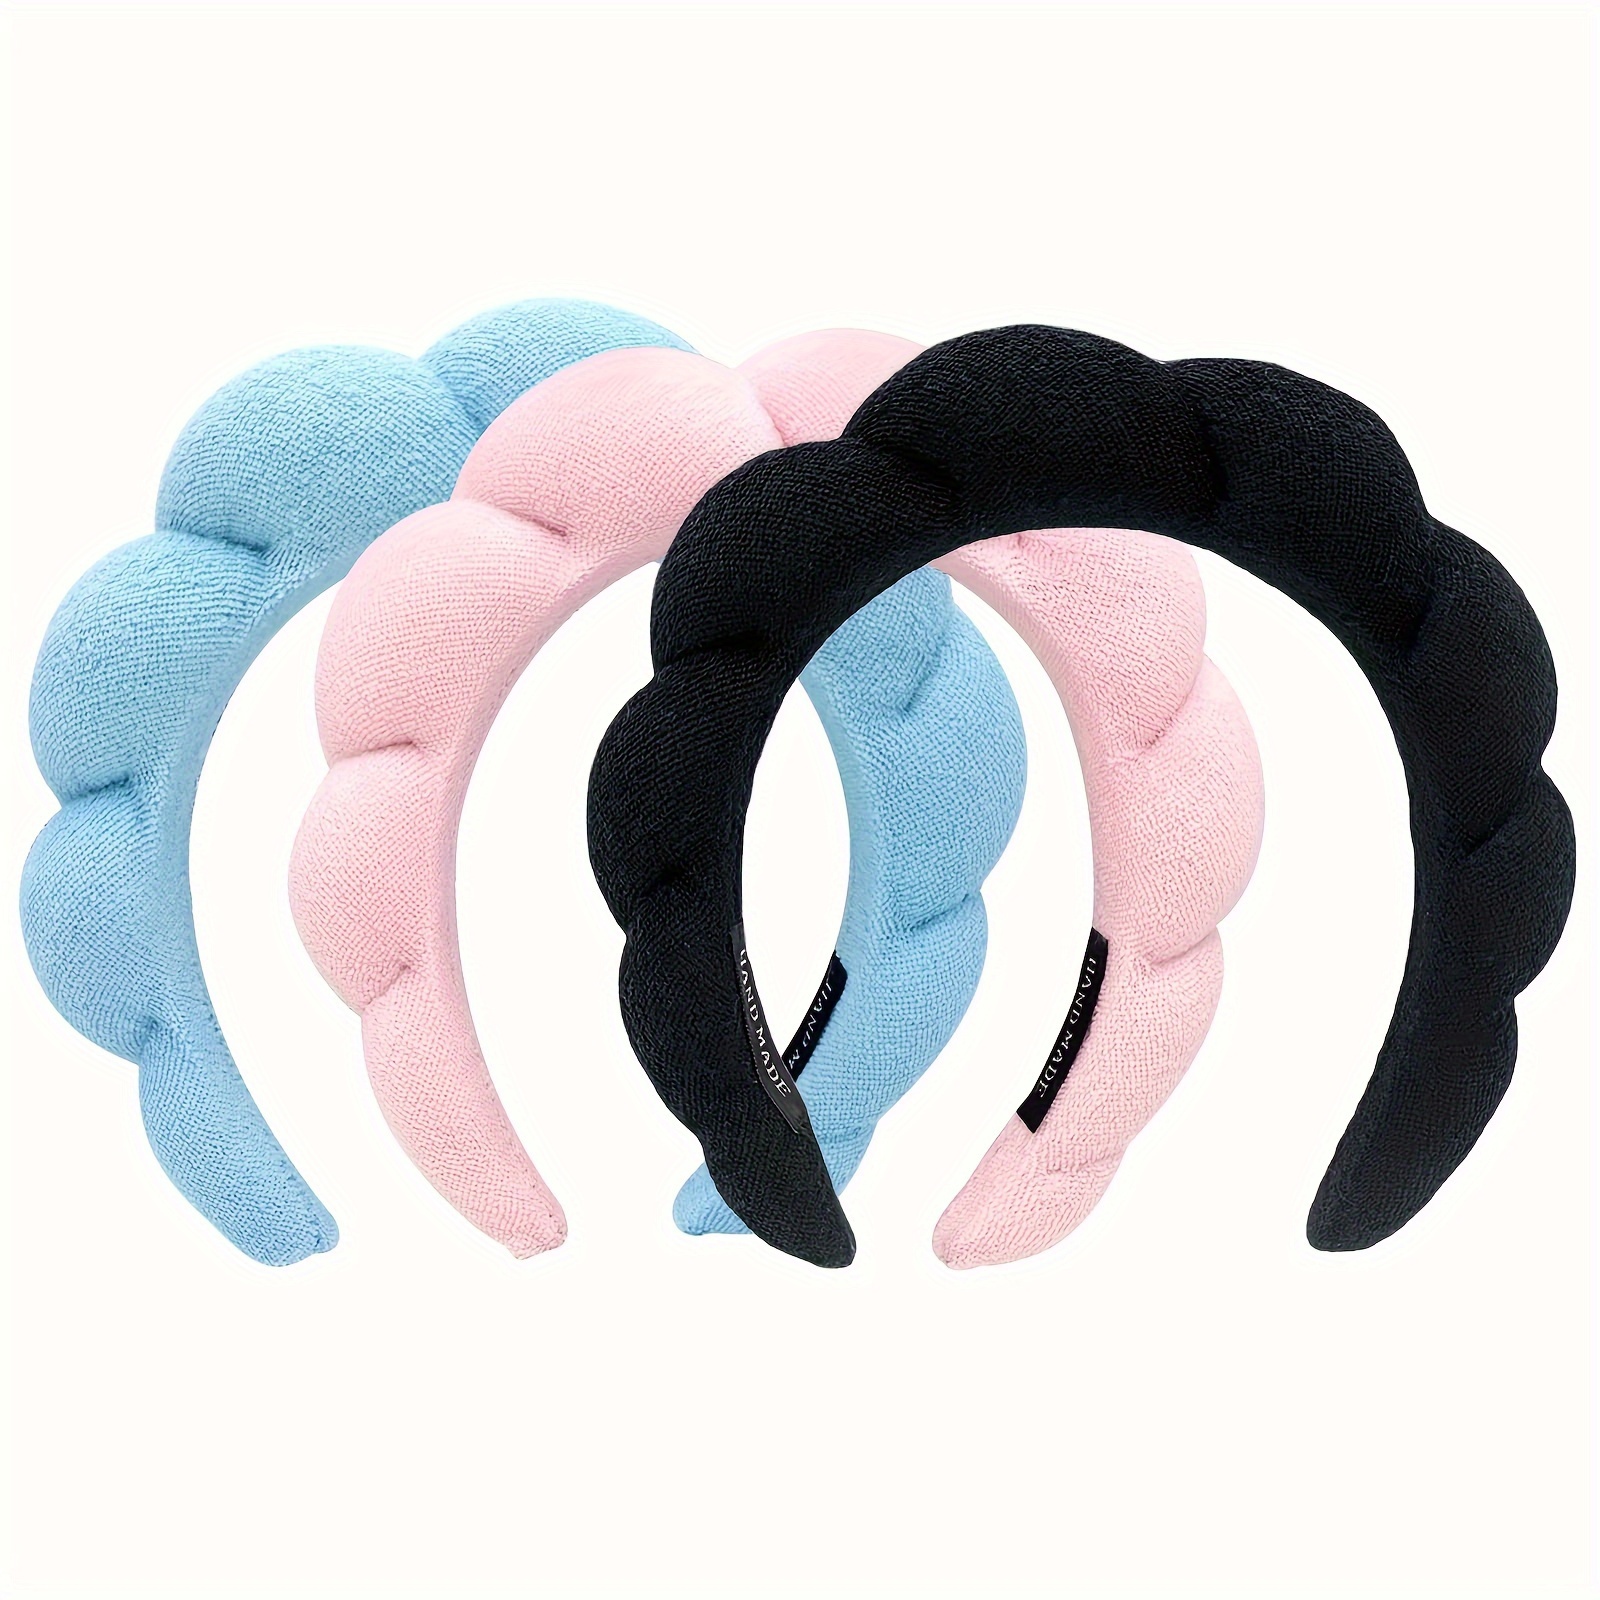 Spa Headband for Women,Sponge Terry Cloth Fabric Head Band,Soft&Non Slip  Hair Band for Washing Face,Makeup,Skincare,Shower,Hair Accessories（Blue）